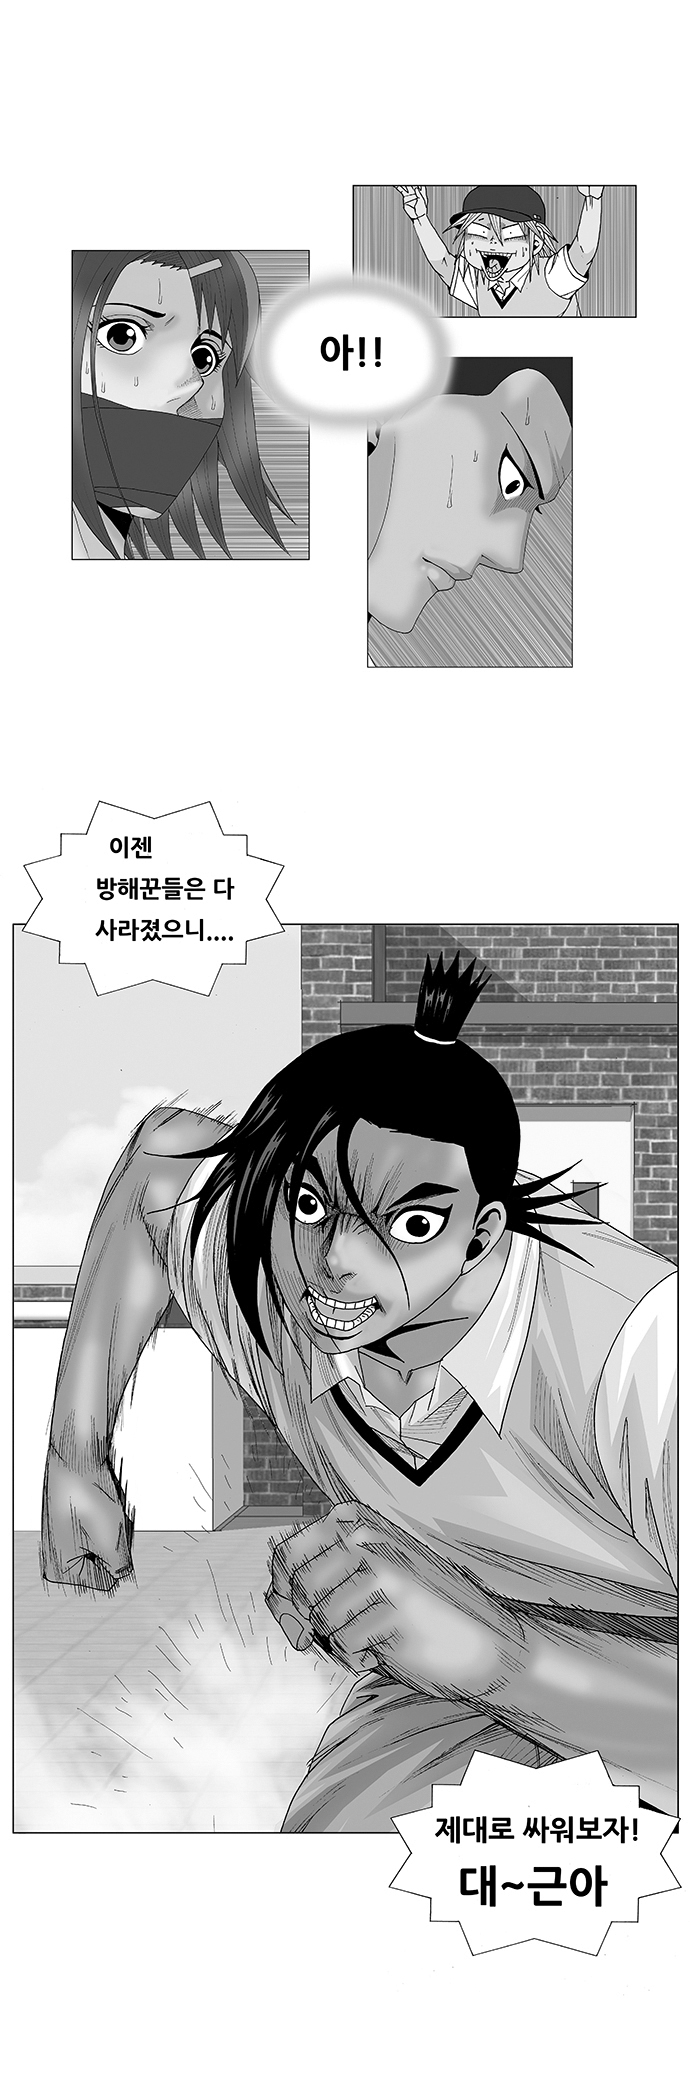 Ultimate Legend - Kang Hae Hyo - Chapter 81 - Page 1